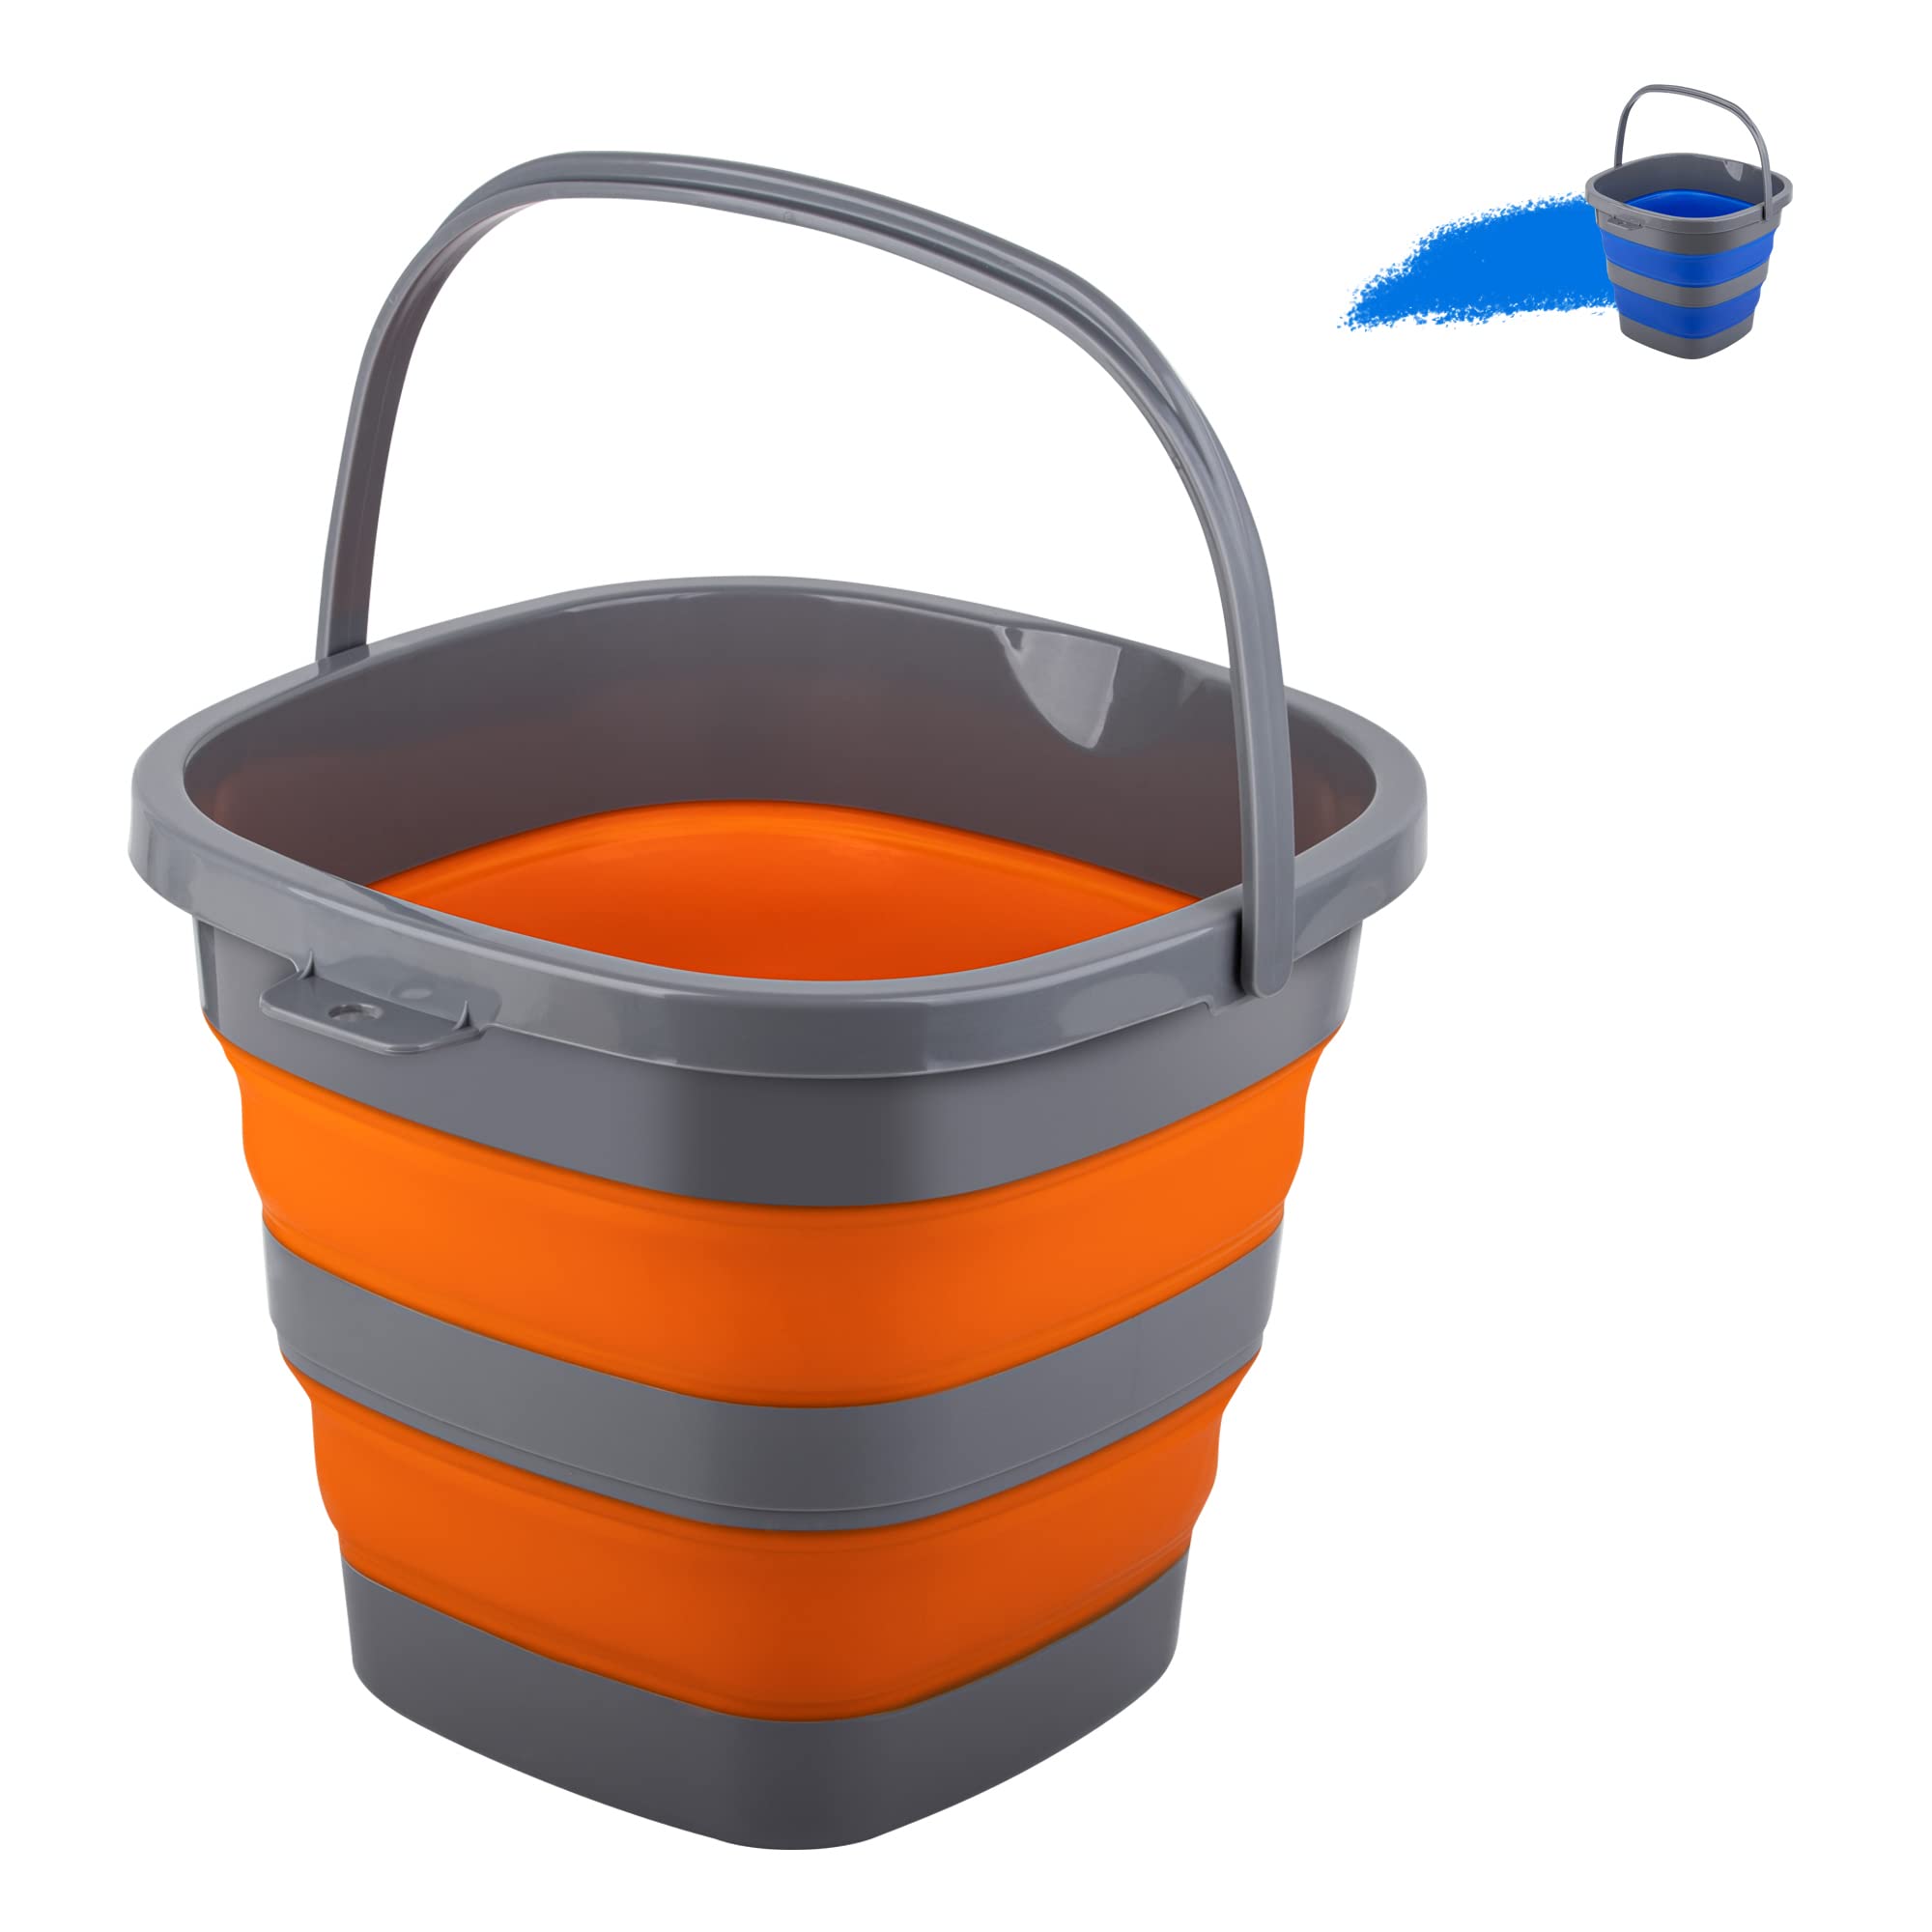 Collapsible Bucket with 2.6 Gallon (10L), Mop Bucket for Cleaning, Plastic  Bucket for Garden, Car Washing or Camping, Portable Fishing Water Pail 2.6  Gal / 10L Orange